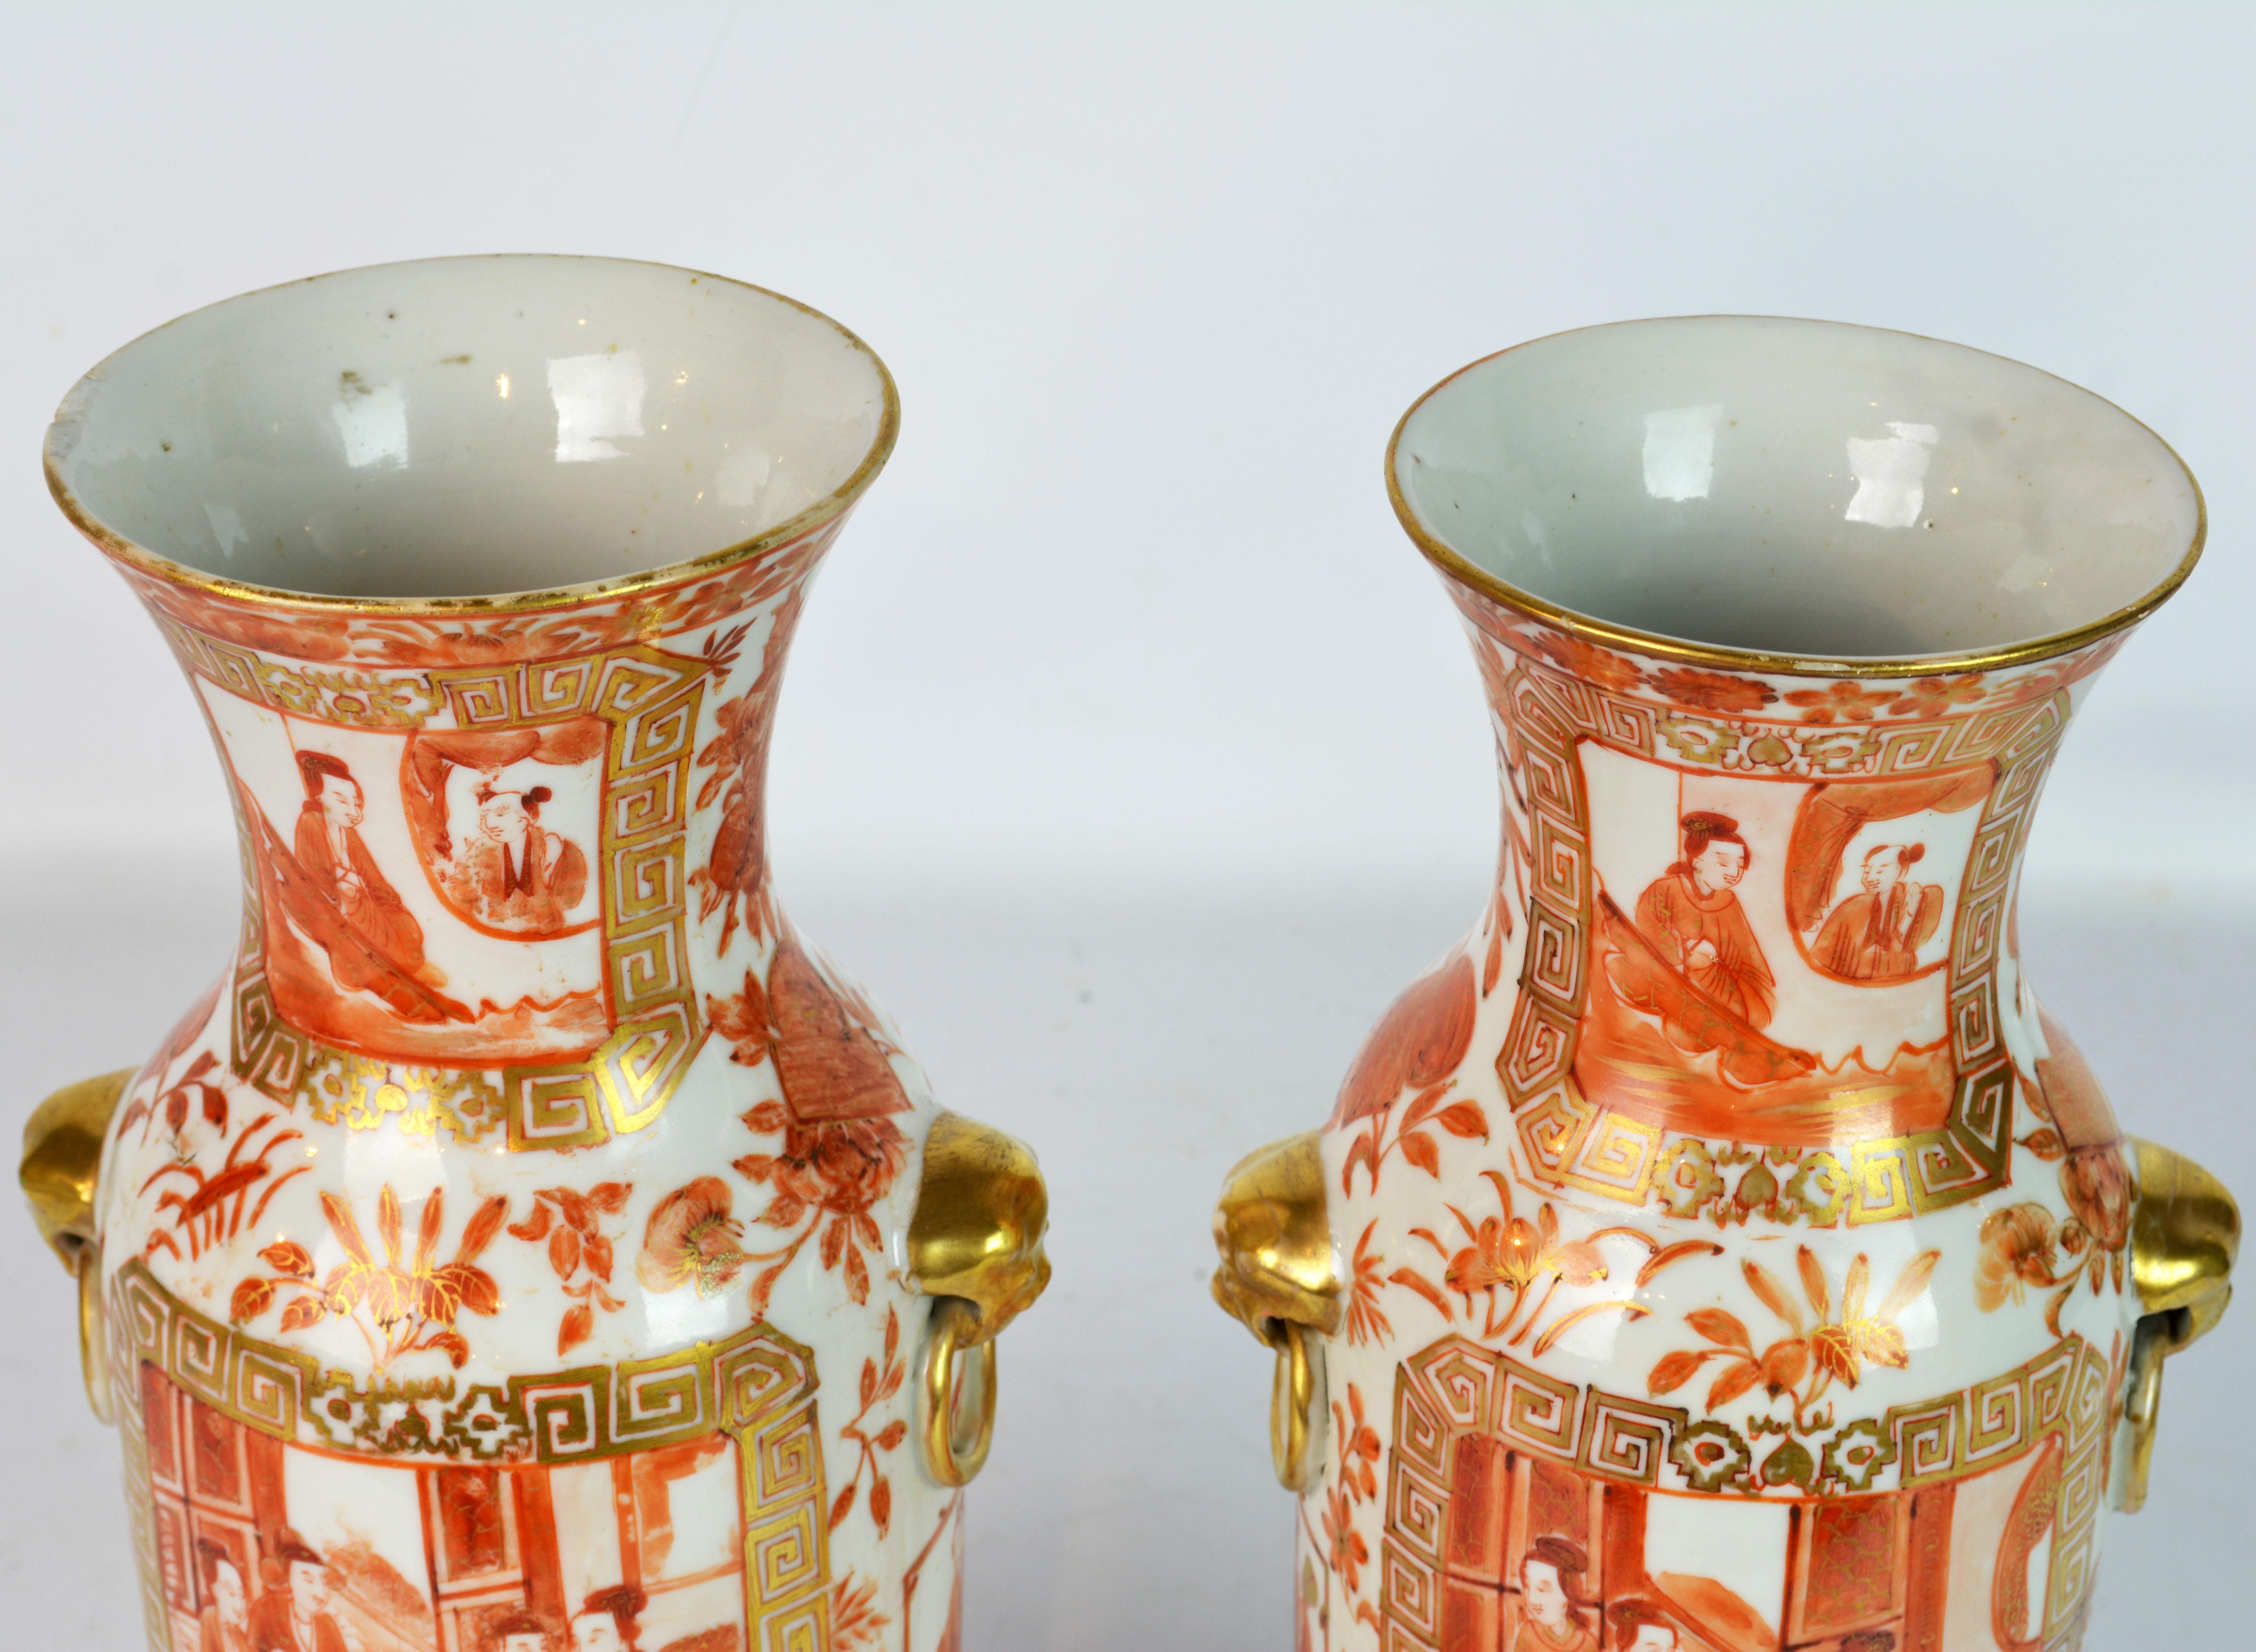 Rare 19th Century Orange and Gilt Decorated Chinese Export Daoguang Vases, Pair 1